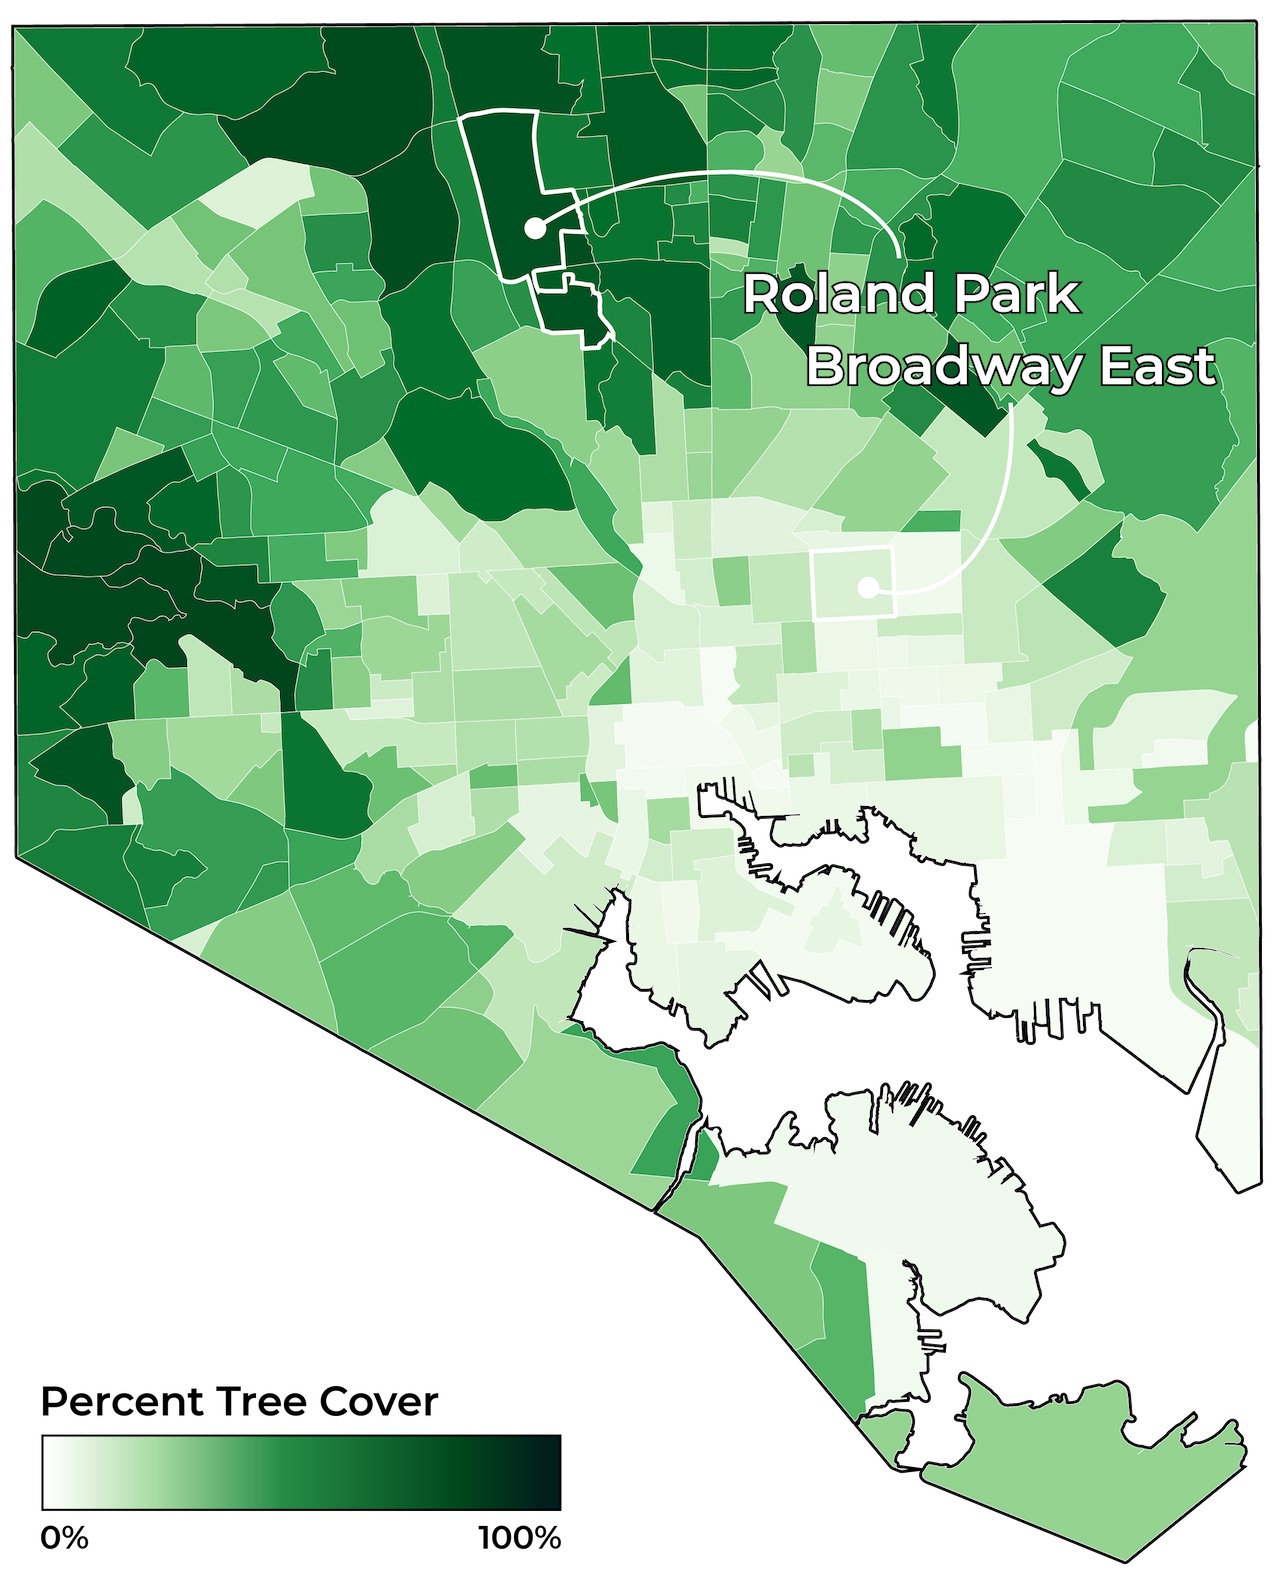 This map shows each neighborhood color-coded in shades of green according to how much is covered in tree canopy.